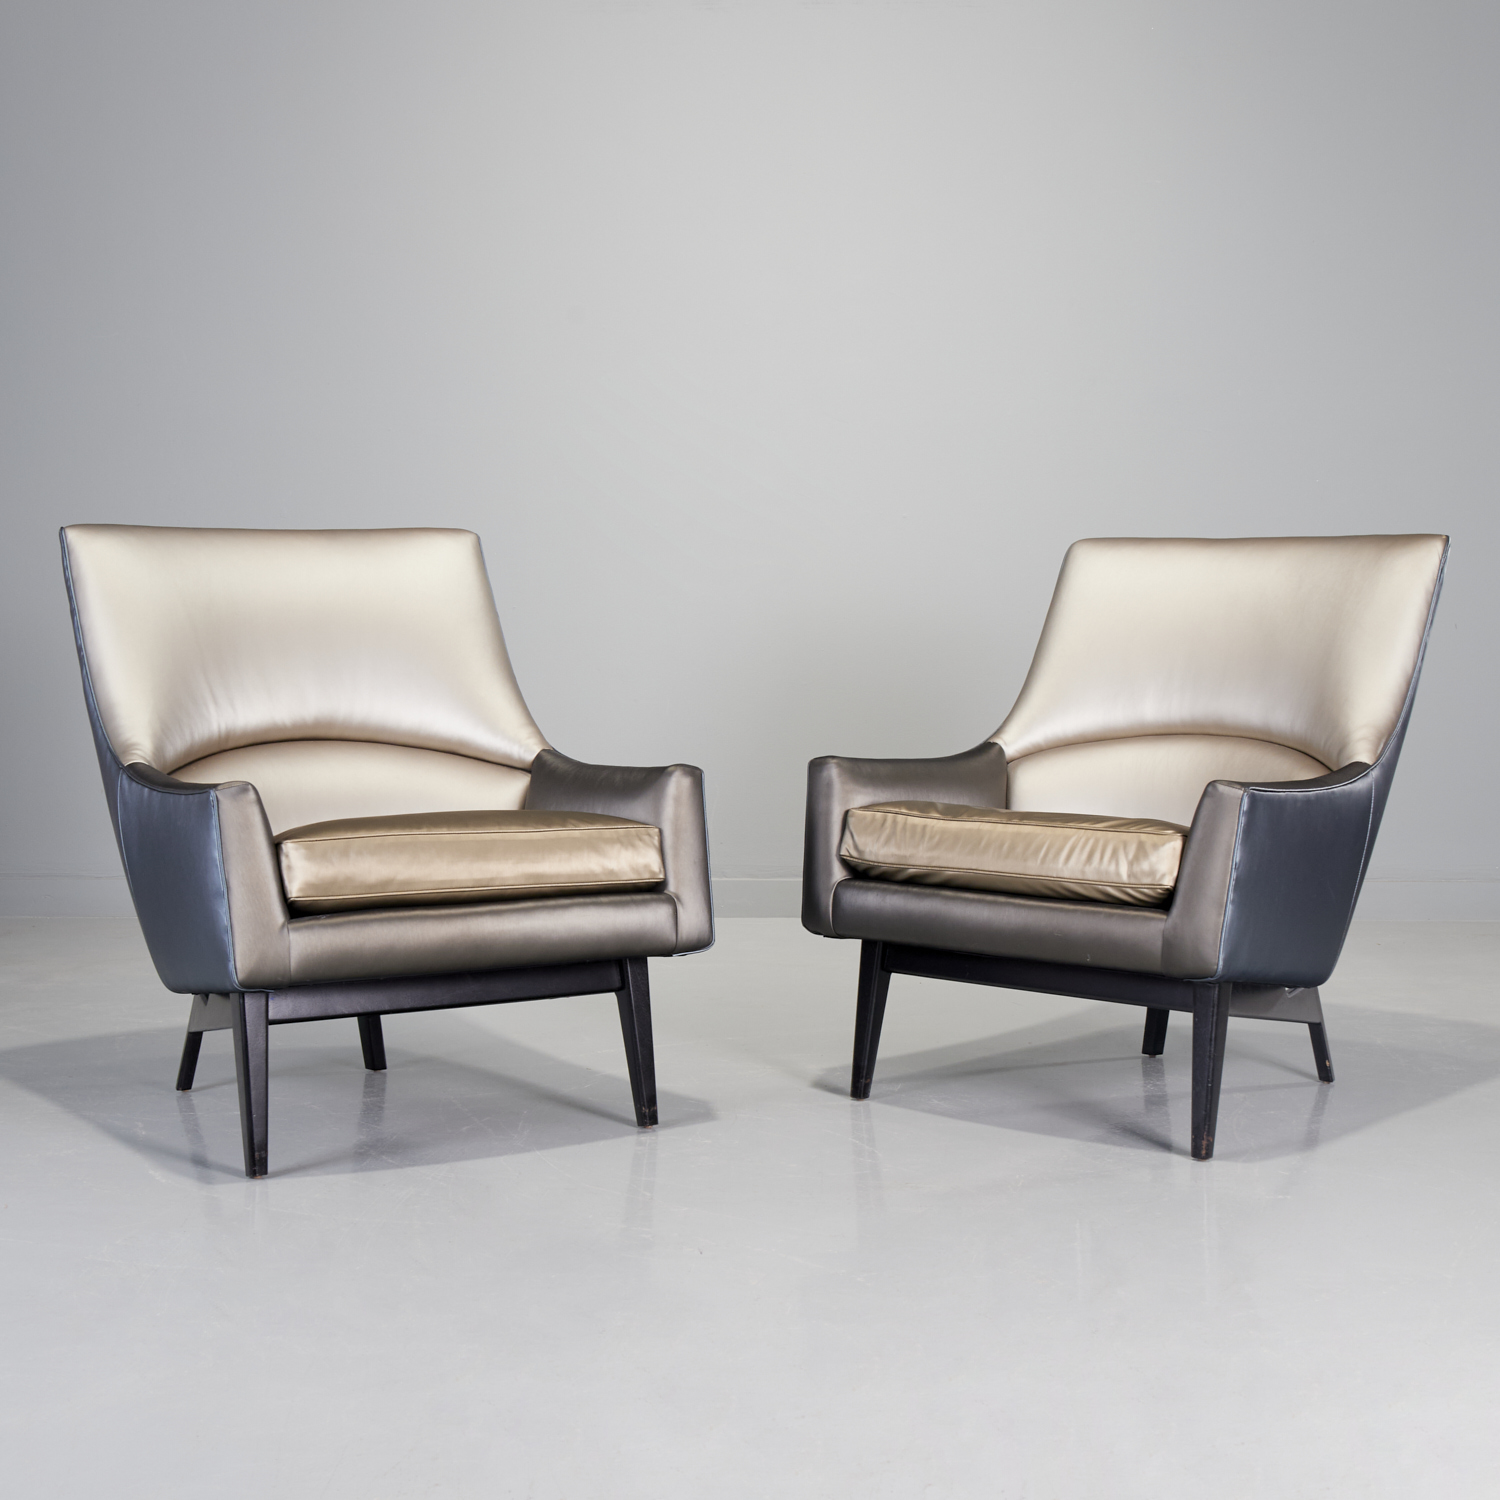 JENS RISOM PAIR A CHAIRS 1960s 2000s  360c1e